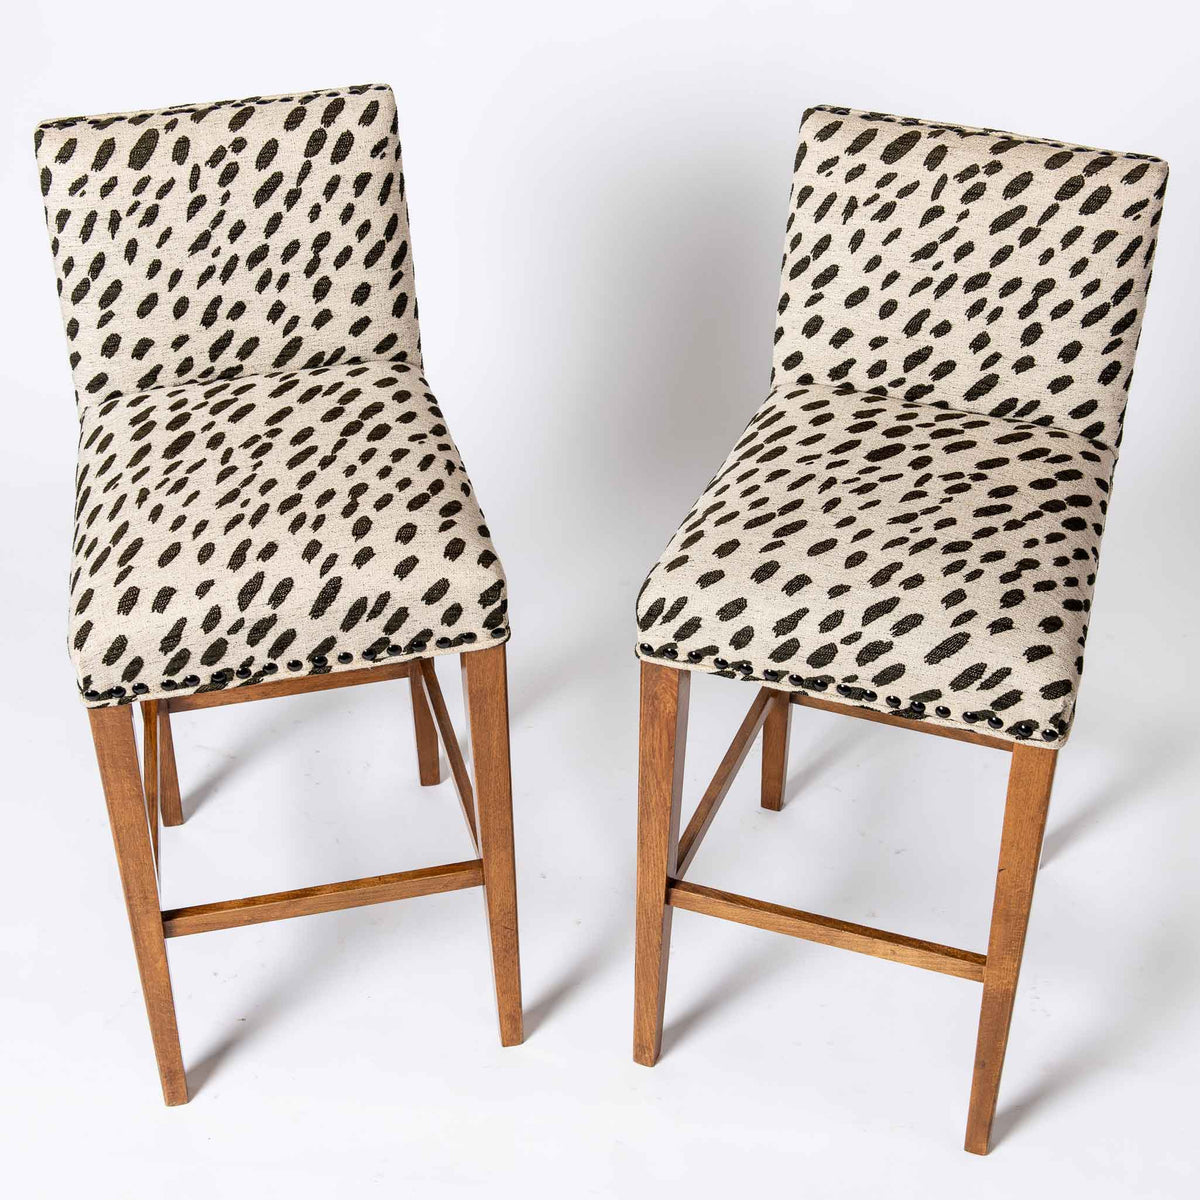 Upholstered Tall Chairs S2 F11